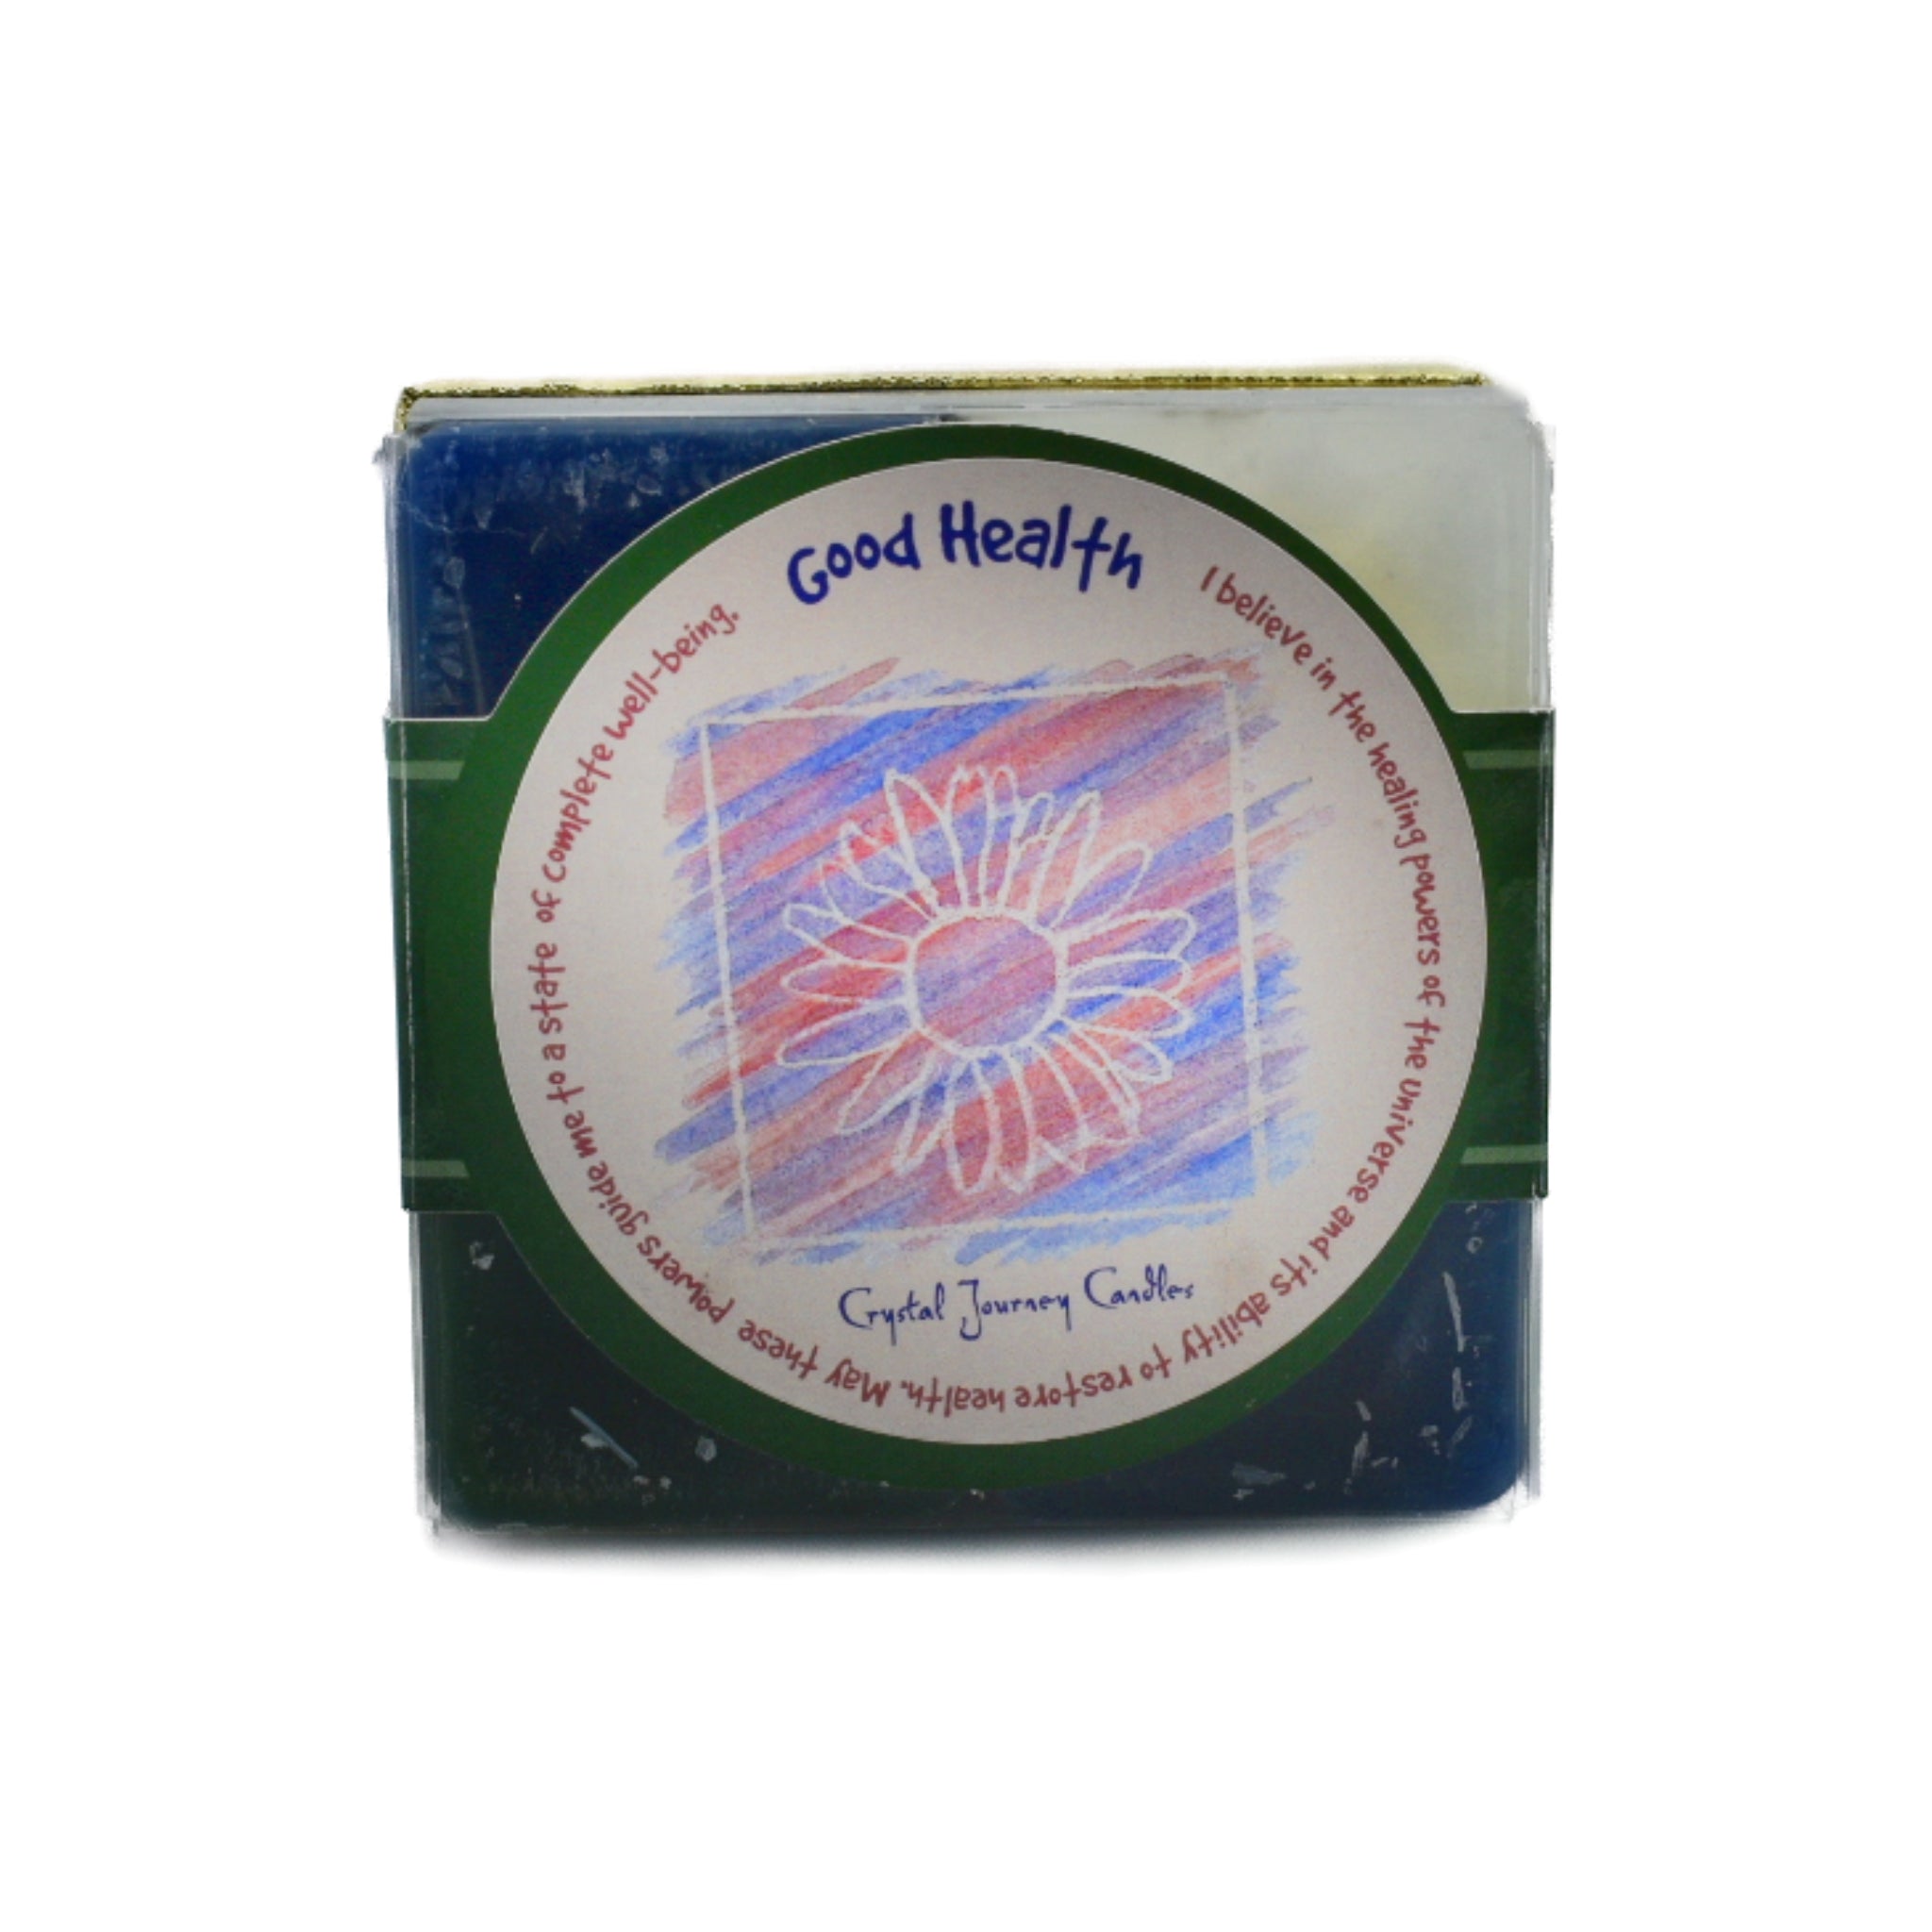 Good Health Square Pack Candle.  This four pack has two good health, a spirit and a peace candle.